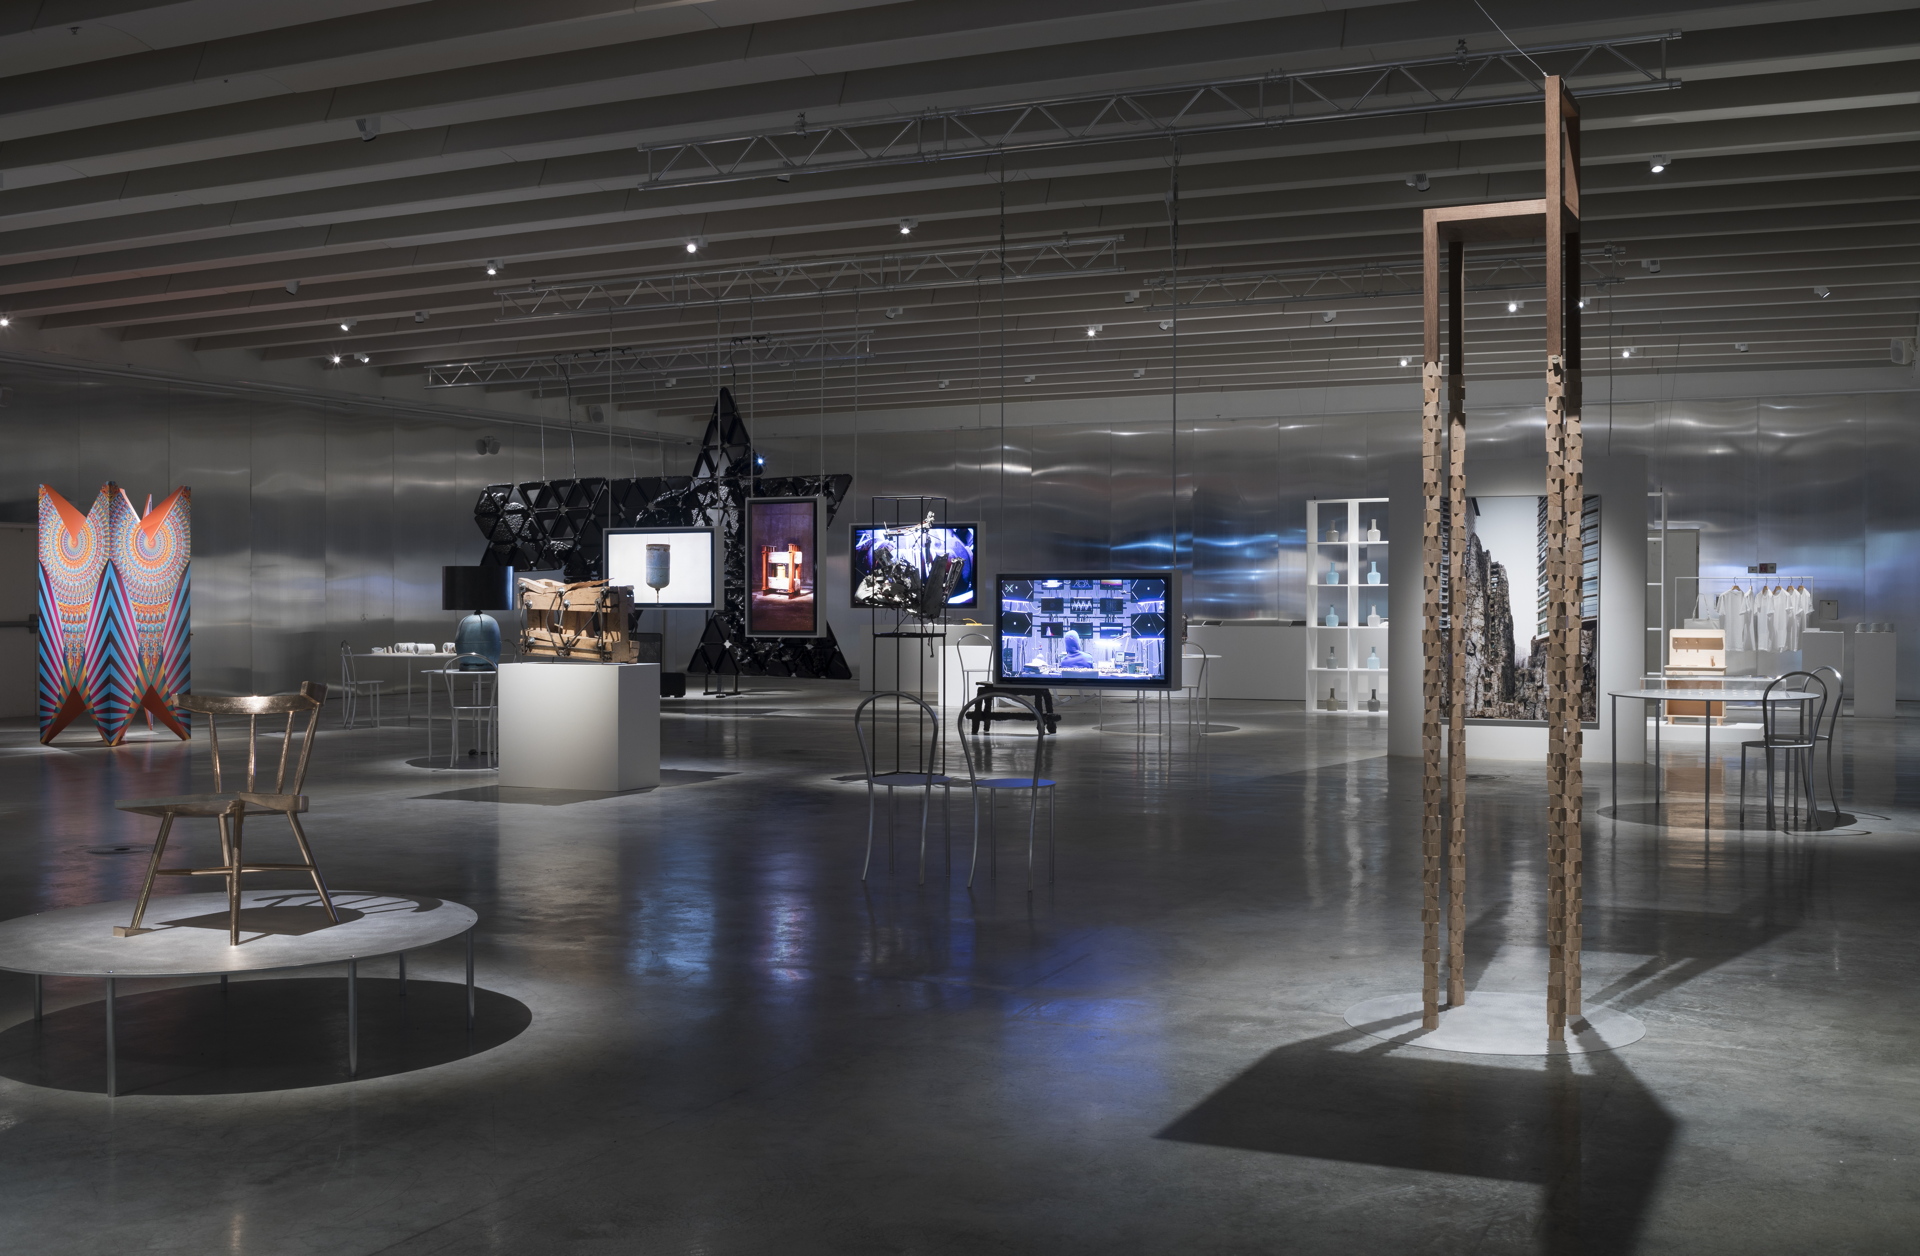 State of Extremes exhibition at Design Museum Holon | Livegreenblog